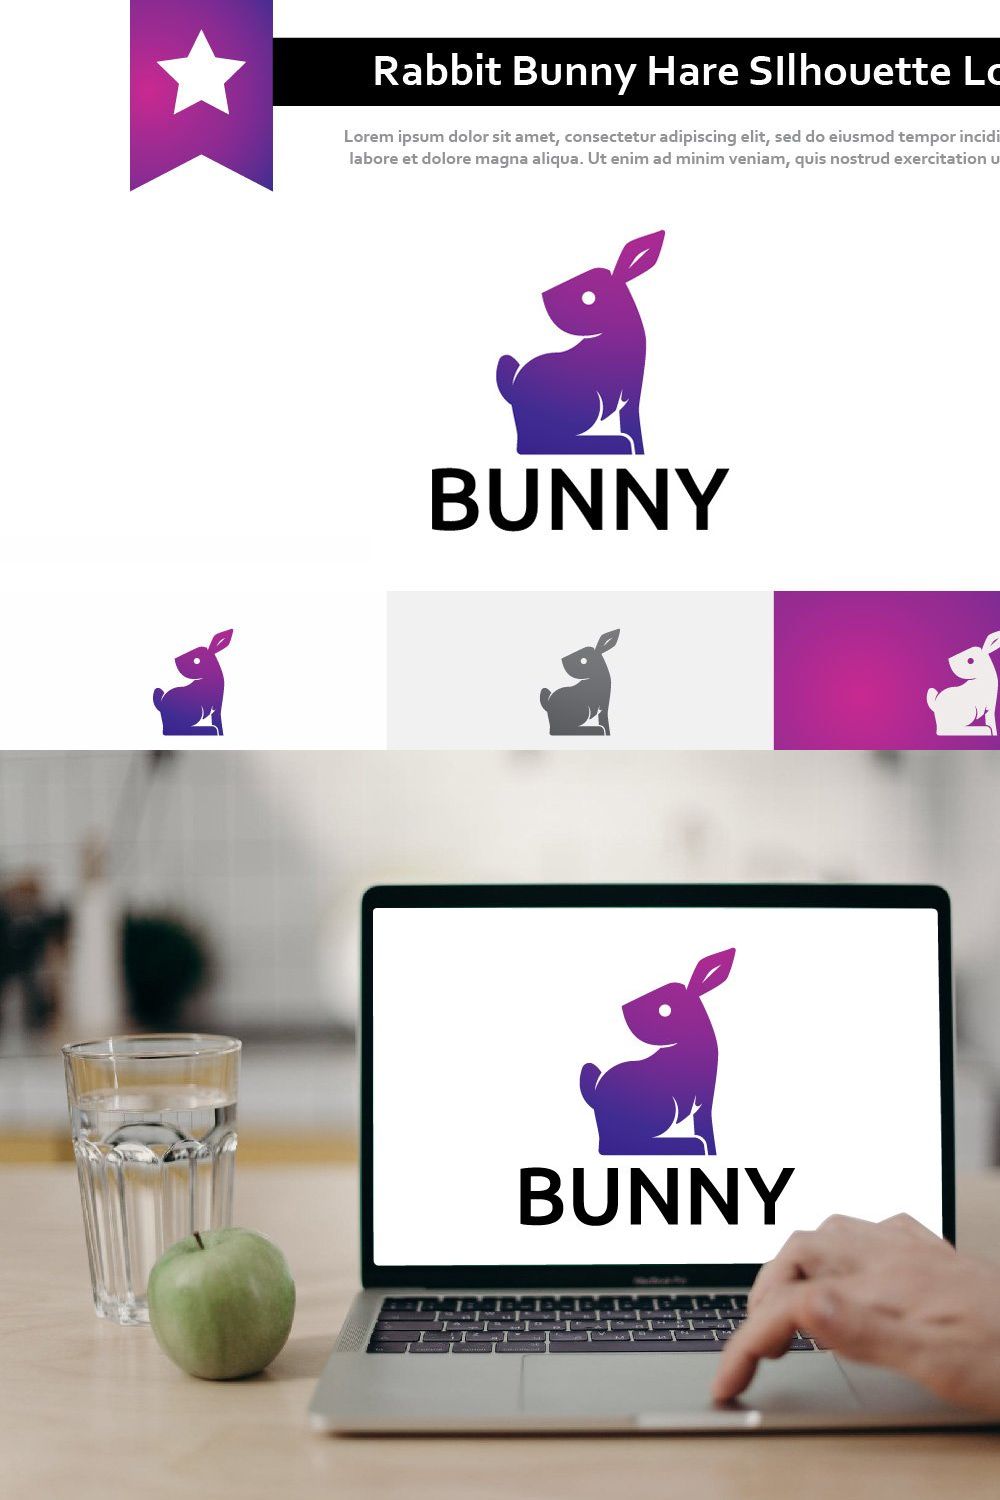 Rabbit Bunny Hare Silhouette Logo pinterest preview image.